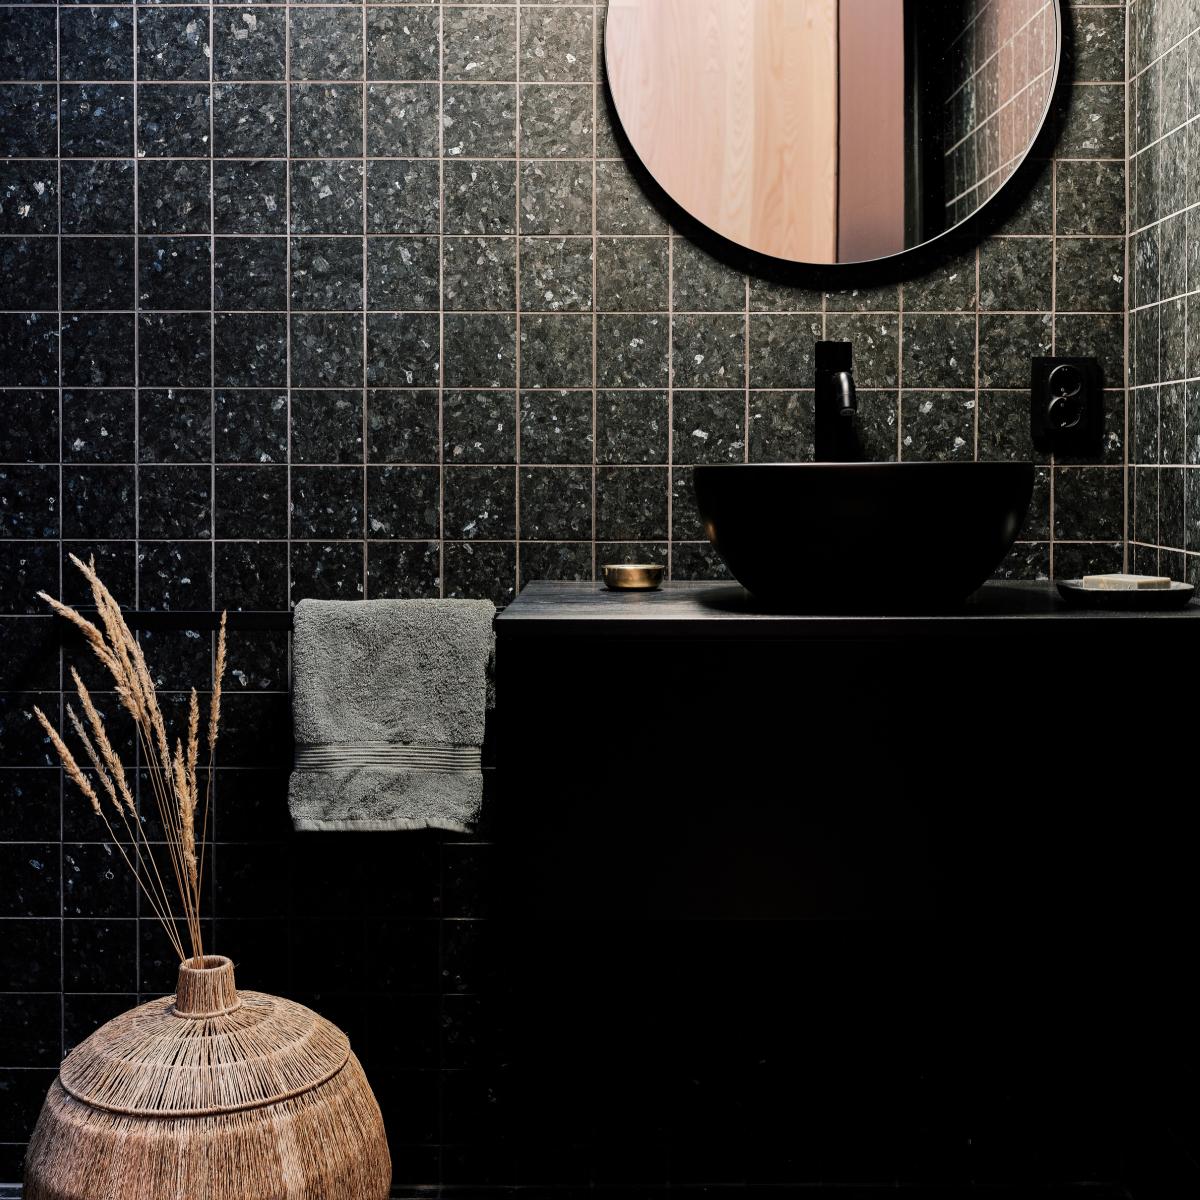 LUNDHS® Emerald® square tiles  –  photo courtesy of Morten Rakke for LUNDHS®